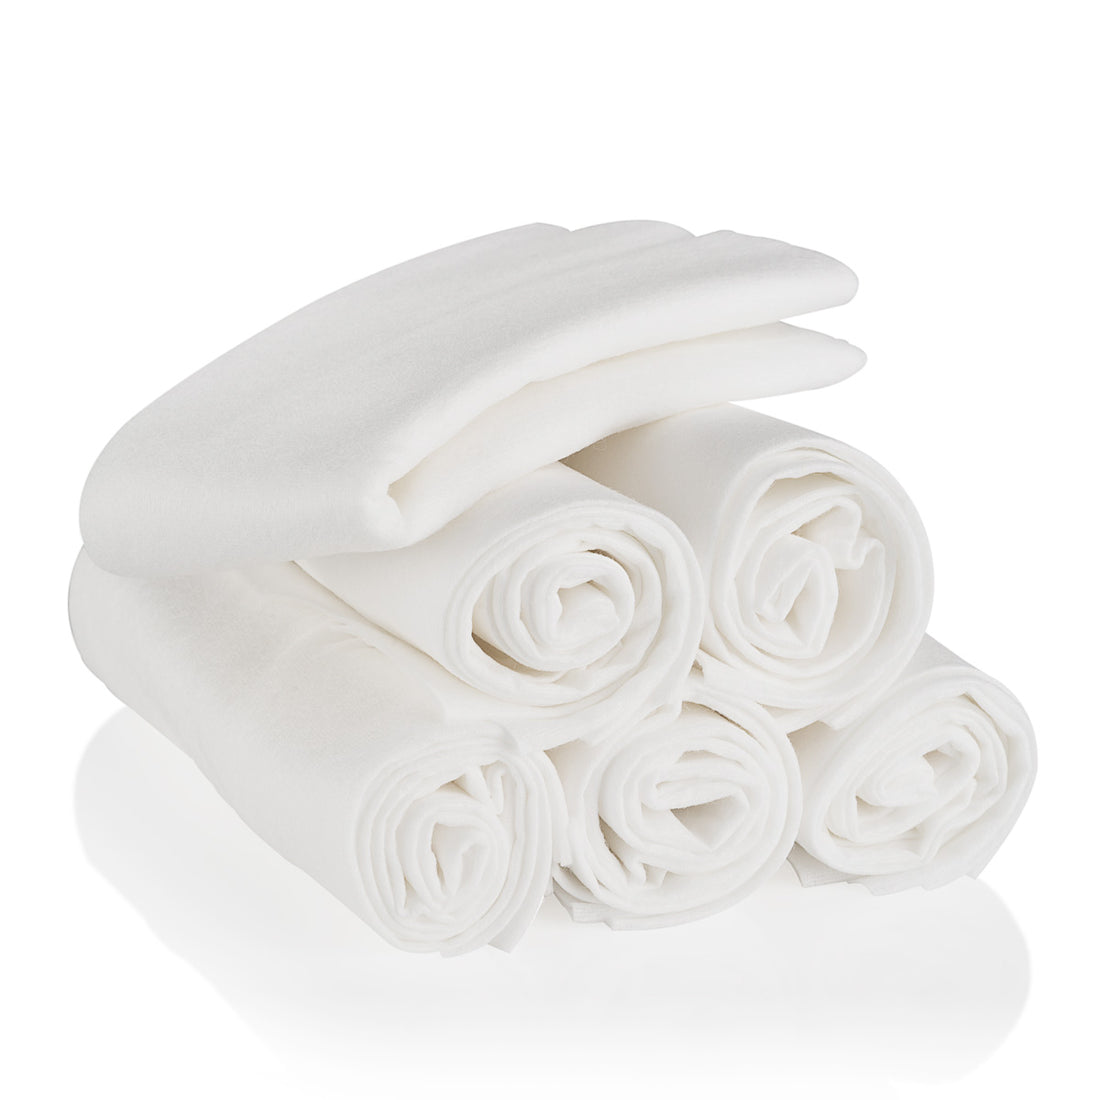 Natural Cleansing Cloths -100% Natural fibres, Bio-degradable, Recyclable